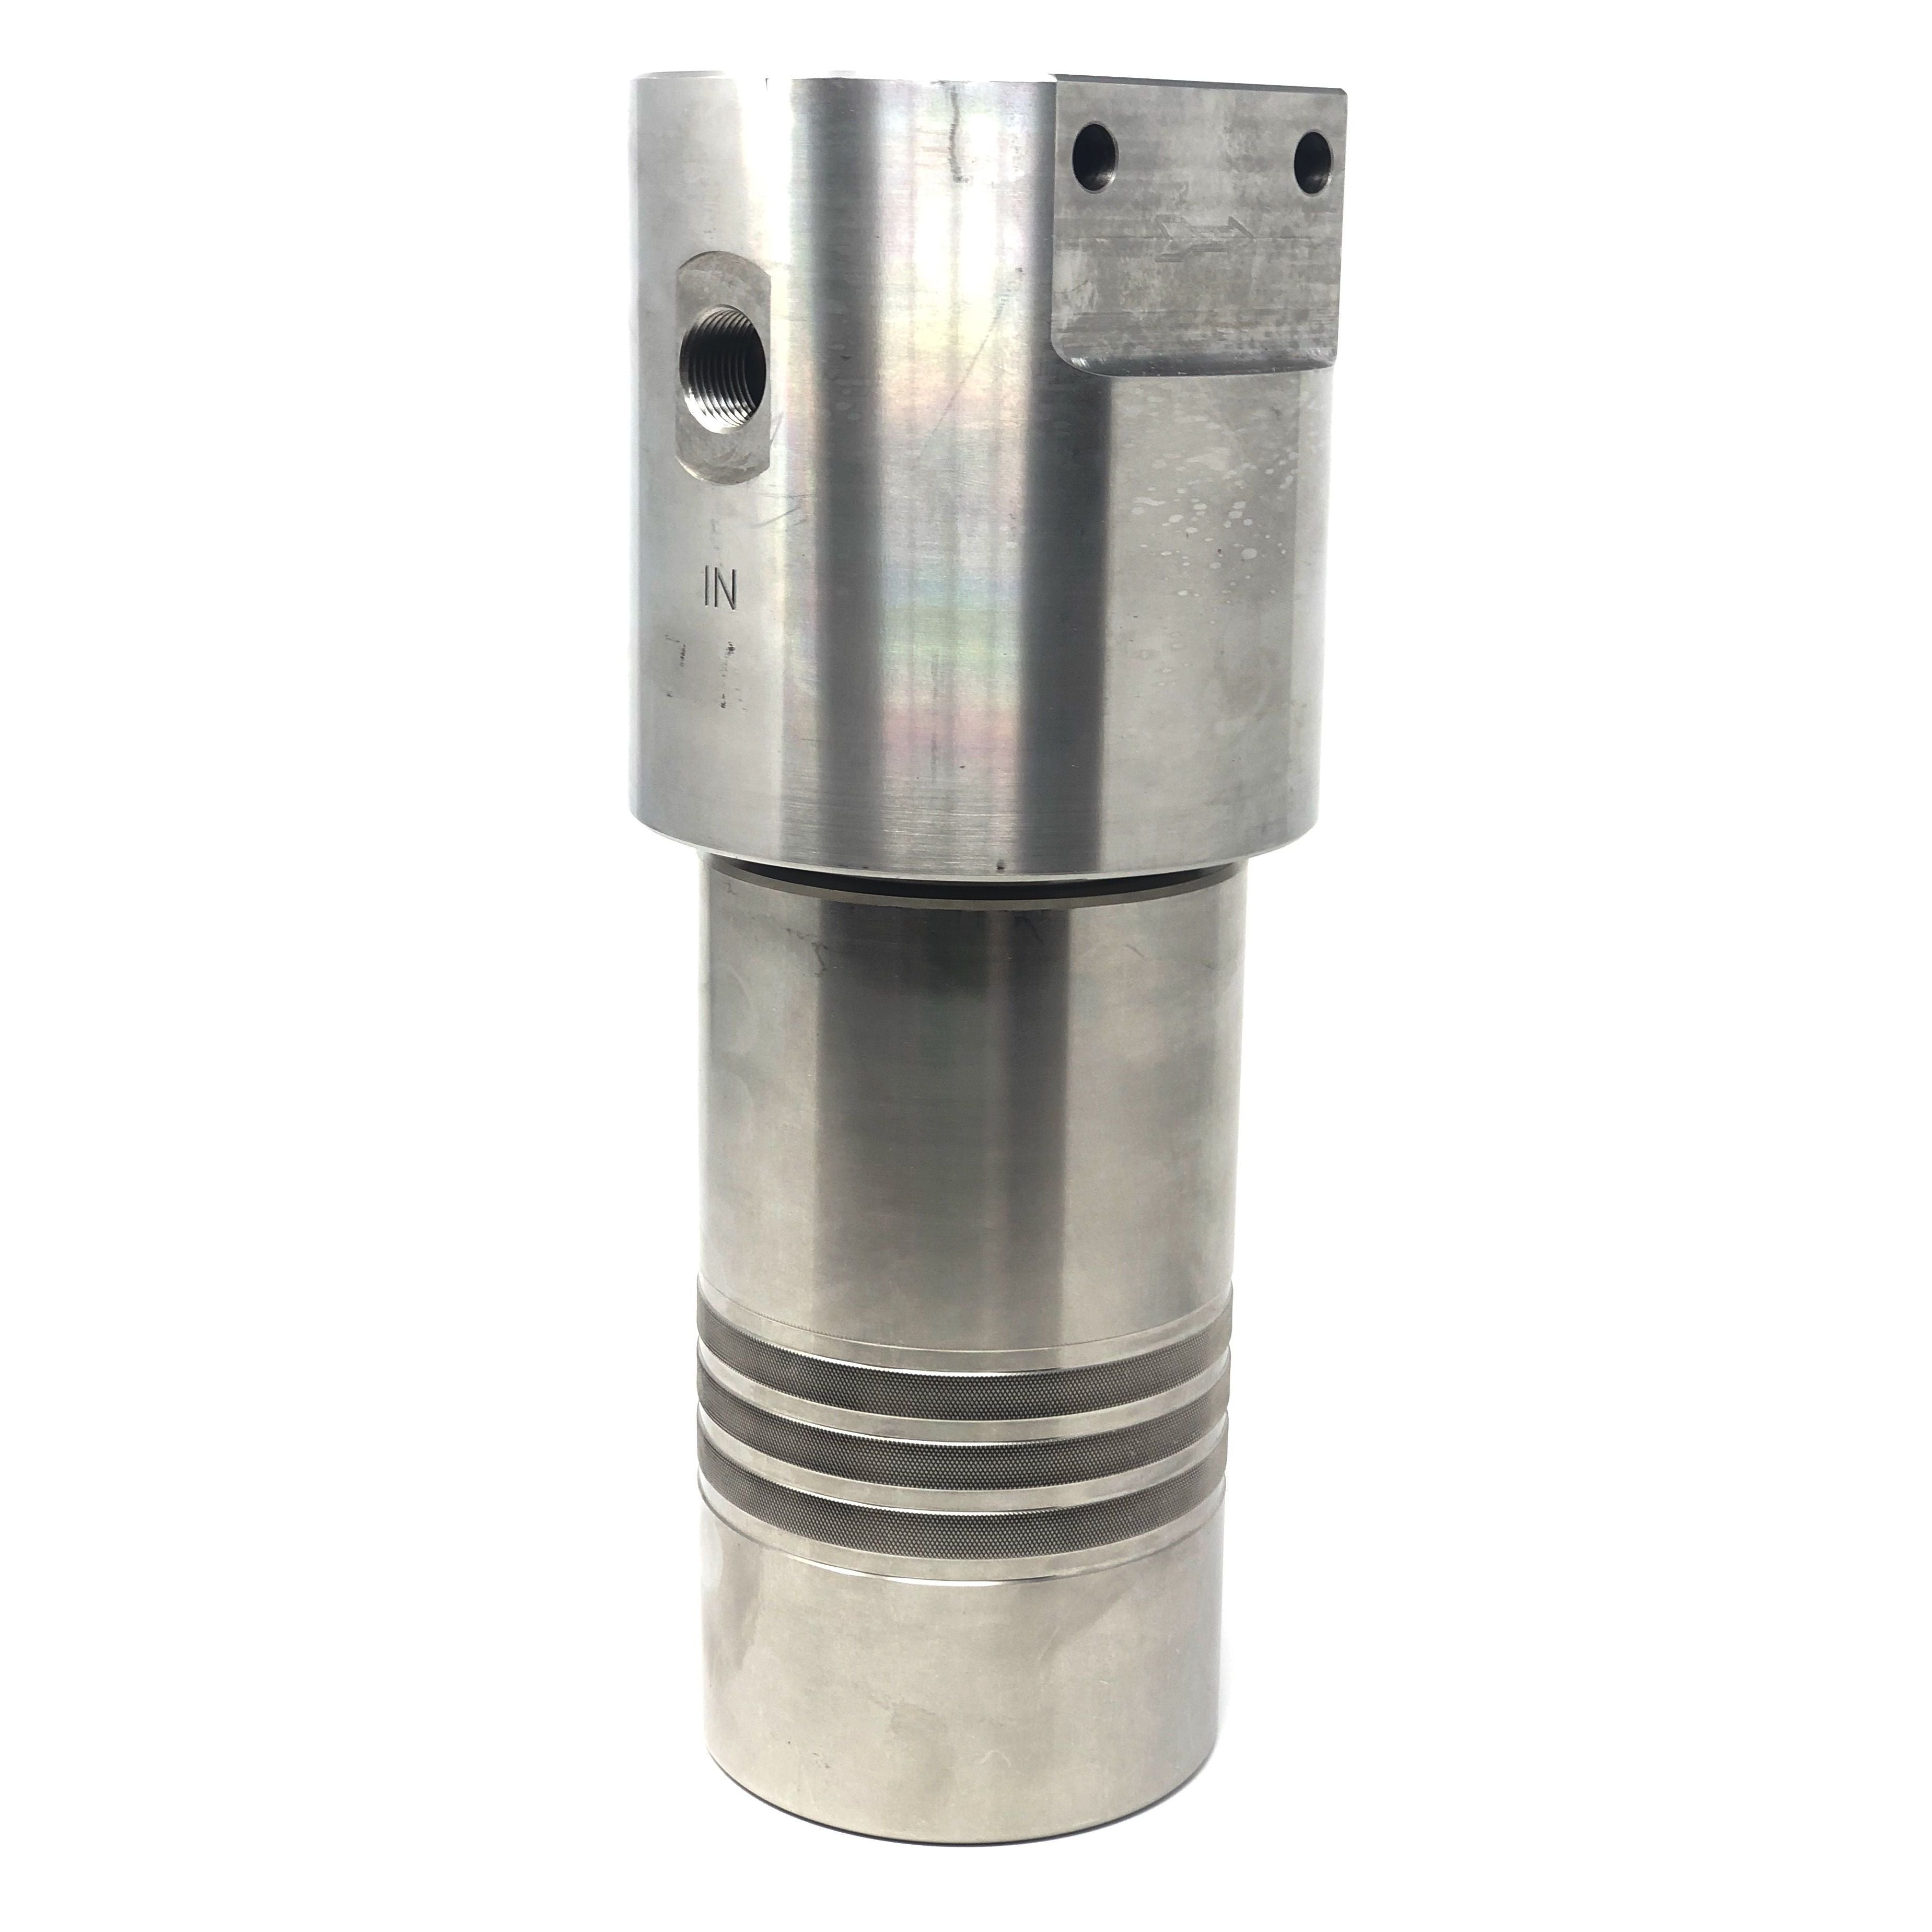 52S-2412S-40SEN : Chase Ultra High Pressure Inline Filter, 10000psi, #12 SAE (3/4"), 40 Micron, With Visual Indicator, No Bypass